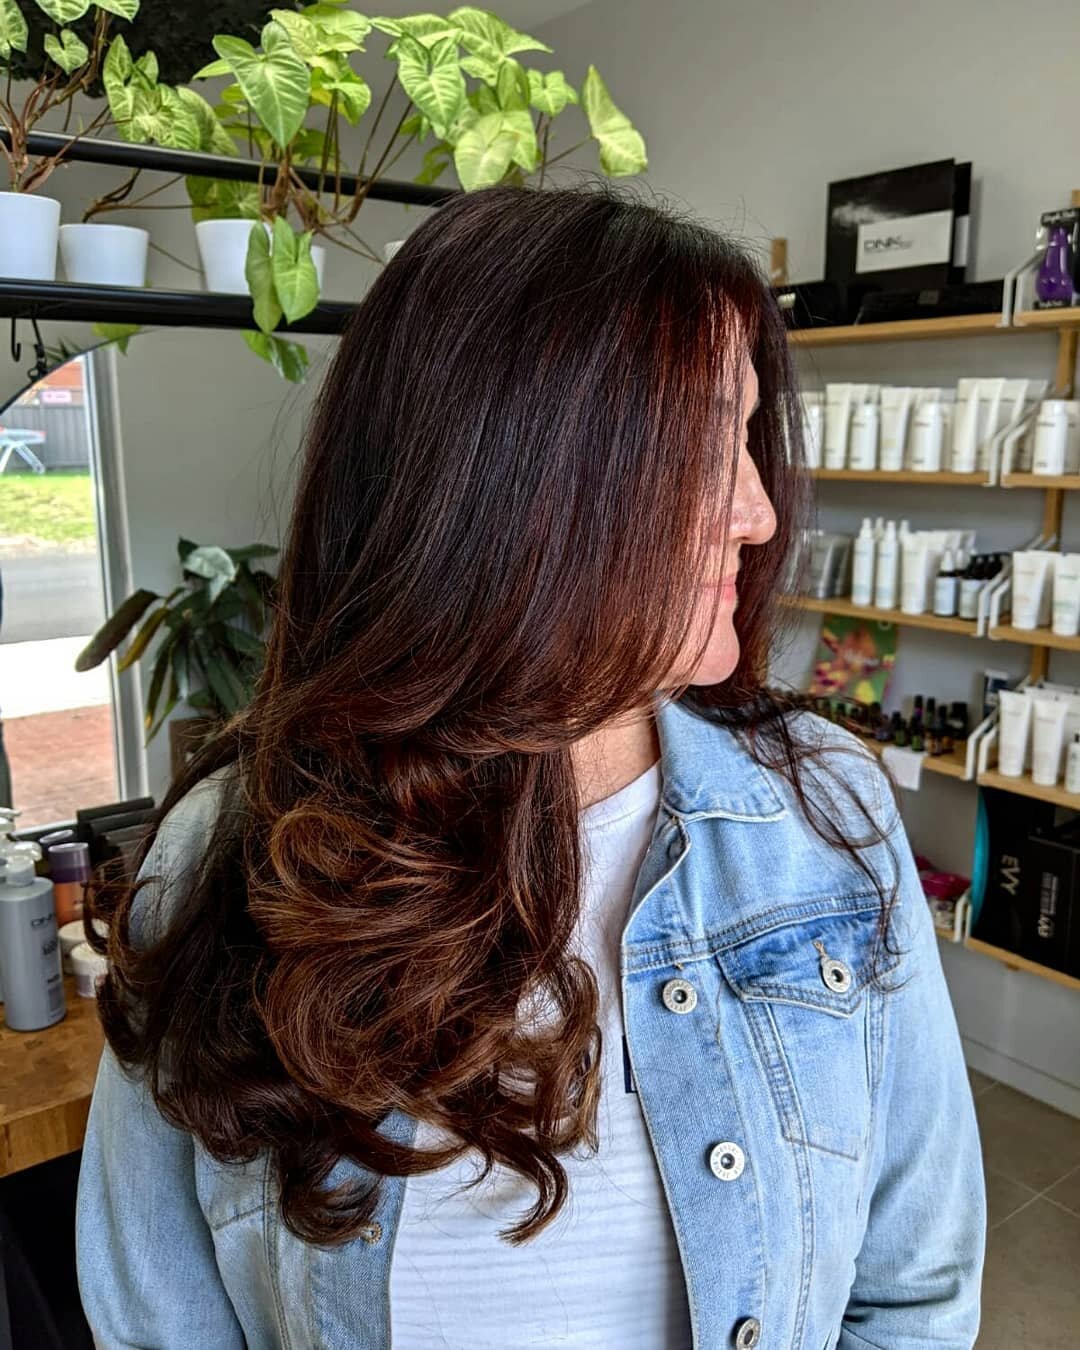 Hair worth making plans for&nbsp;😍 
​
Details for our beautiful client Melisa's hair transformation:
​
​🍃 Balayage, Colour Balance &amp; Toner, Ladies Long Haircut and Bouncy Blowdry.
🍃 DNA Organics Professional, UV Guard Moist Creme, Heatsheild P